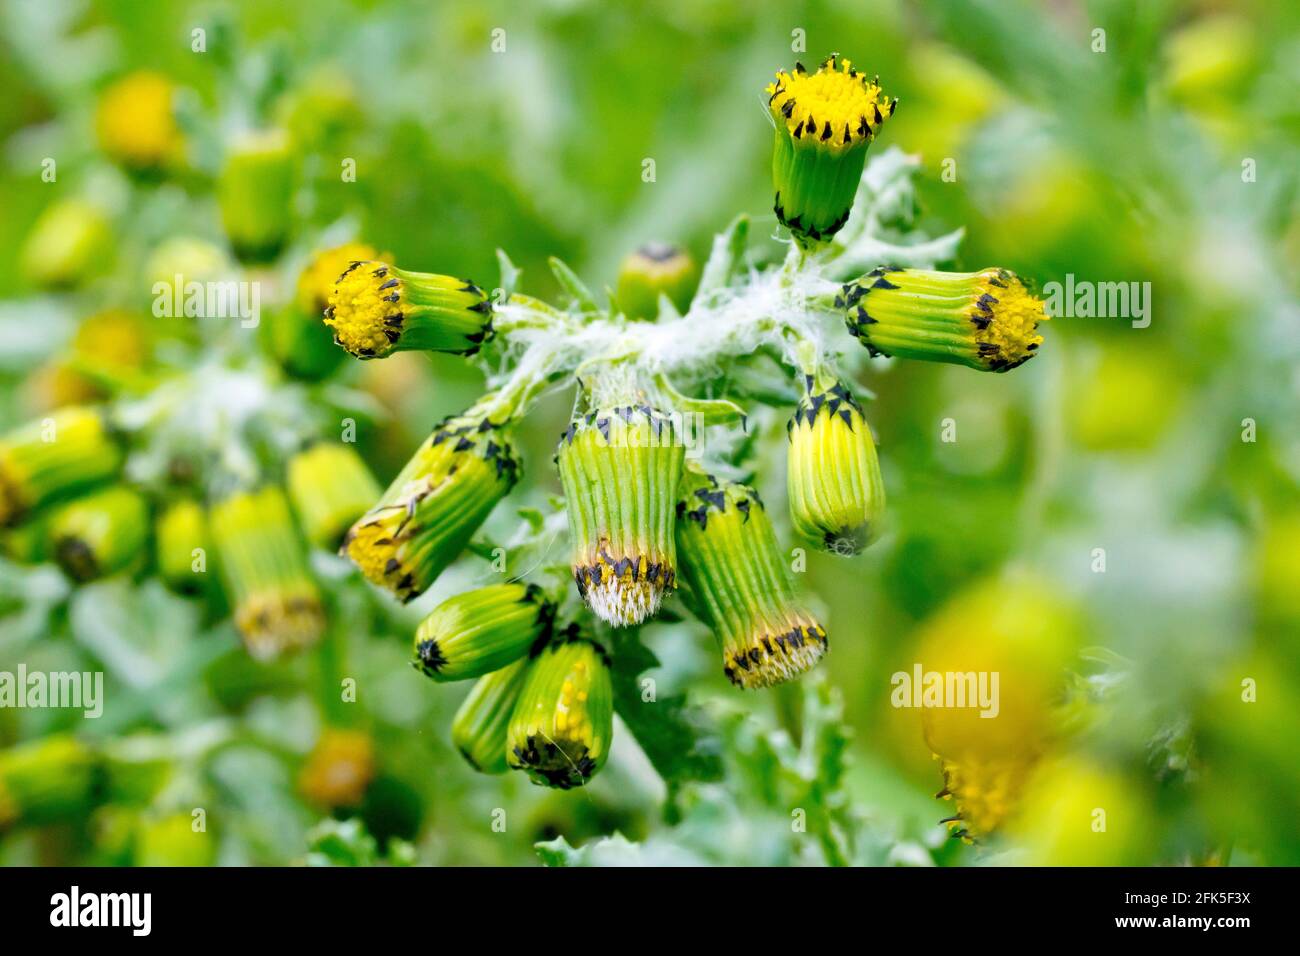 Groundsel (senecio vulgaris), close up of a cluster of the small flower heads of the plant, an annual weed of gardens and waste places. Stock Photo